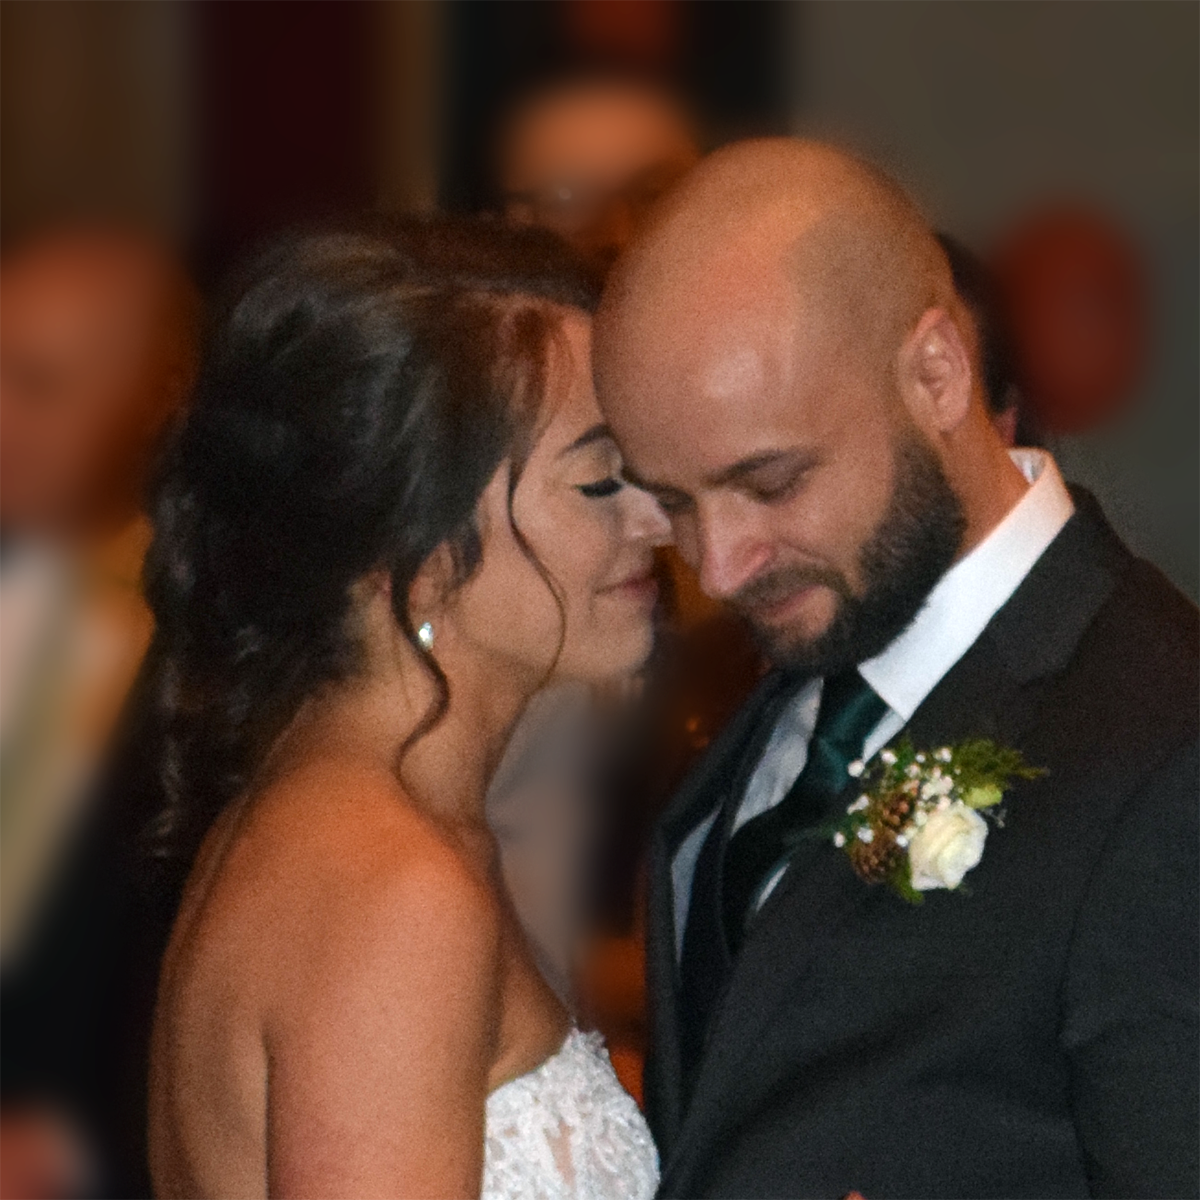 Molly & Cic's wedding at The Cannery, Vernon, NY - photo by Peter Naughton peterthedj.com - December 2019